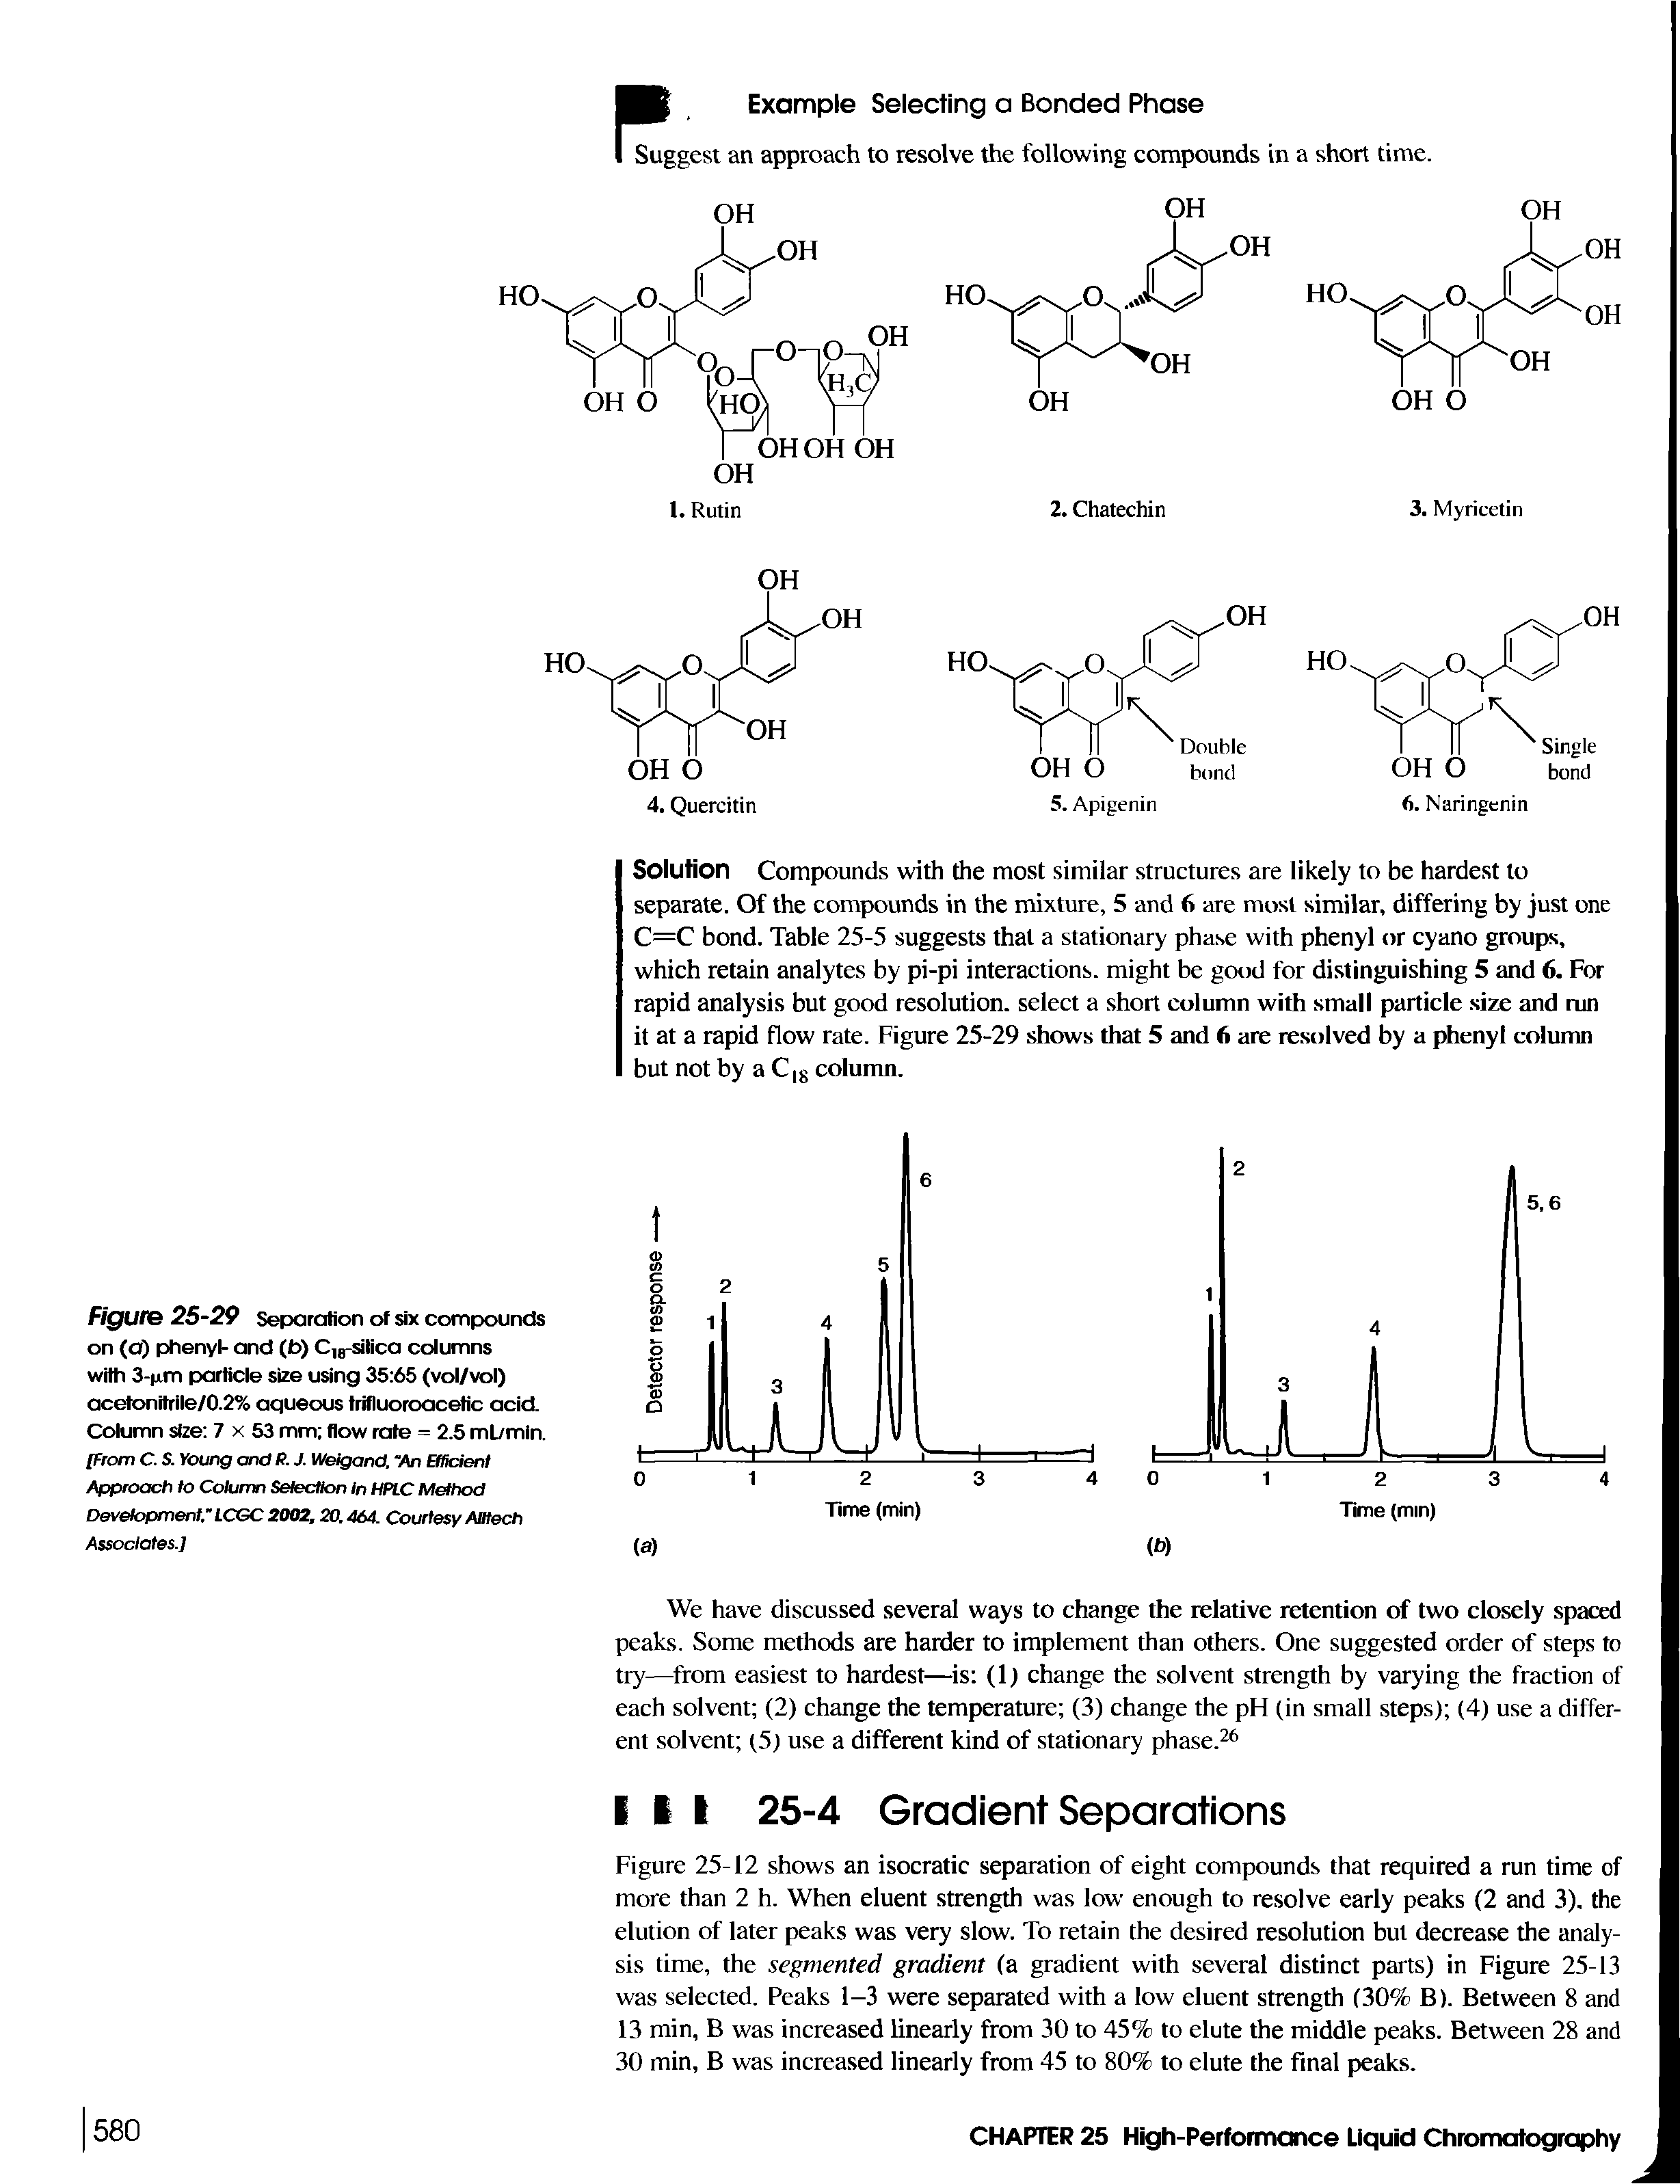 Figure 25-29 Separation of six compounds on (a) phenyl- and (b) Cle-silica columns with 3-p.m particle size using 35 65 (vol/vol) acelonitrile/0.2% aqueous trifluoroacetic acid. Column size 7 x 53 mm flow rate = 2.5 mL/min. [From C. S. Young and R. J. Weigand, "An Efficient Approach to Column Selection In HPLC Method Development." LCGC 2002,20.464. Courtesy Alltech Associates.]...